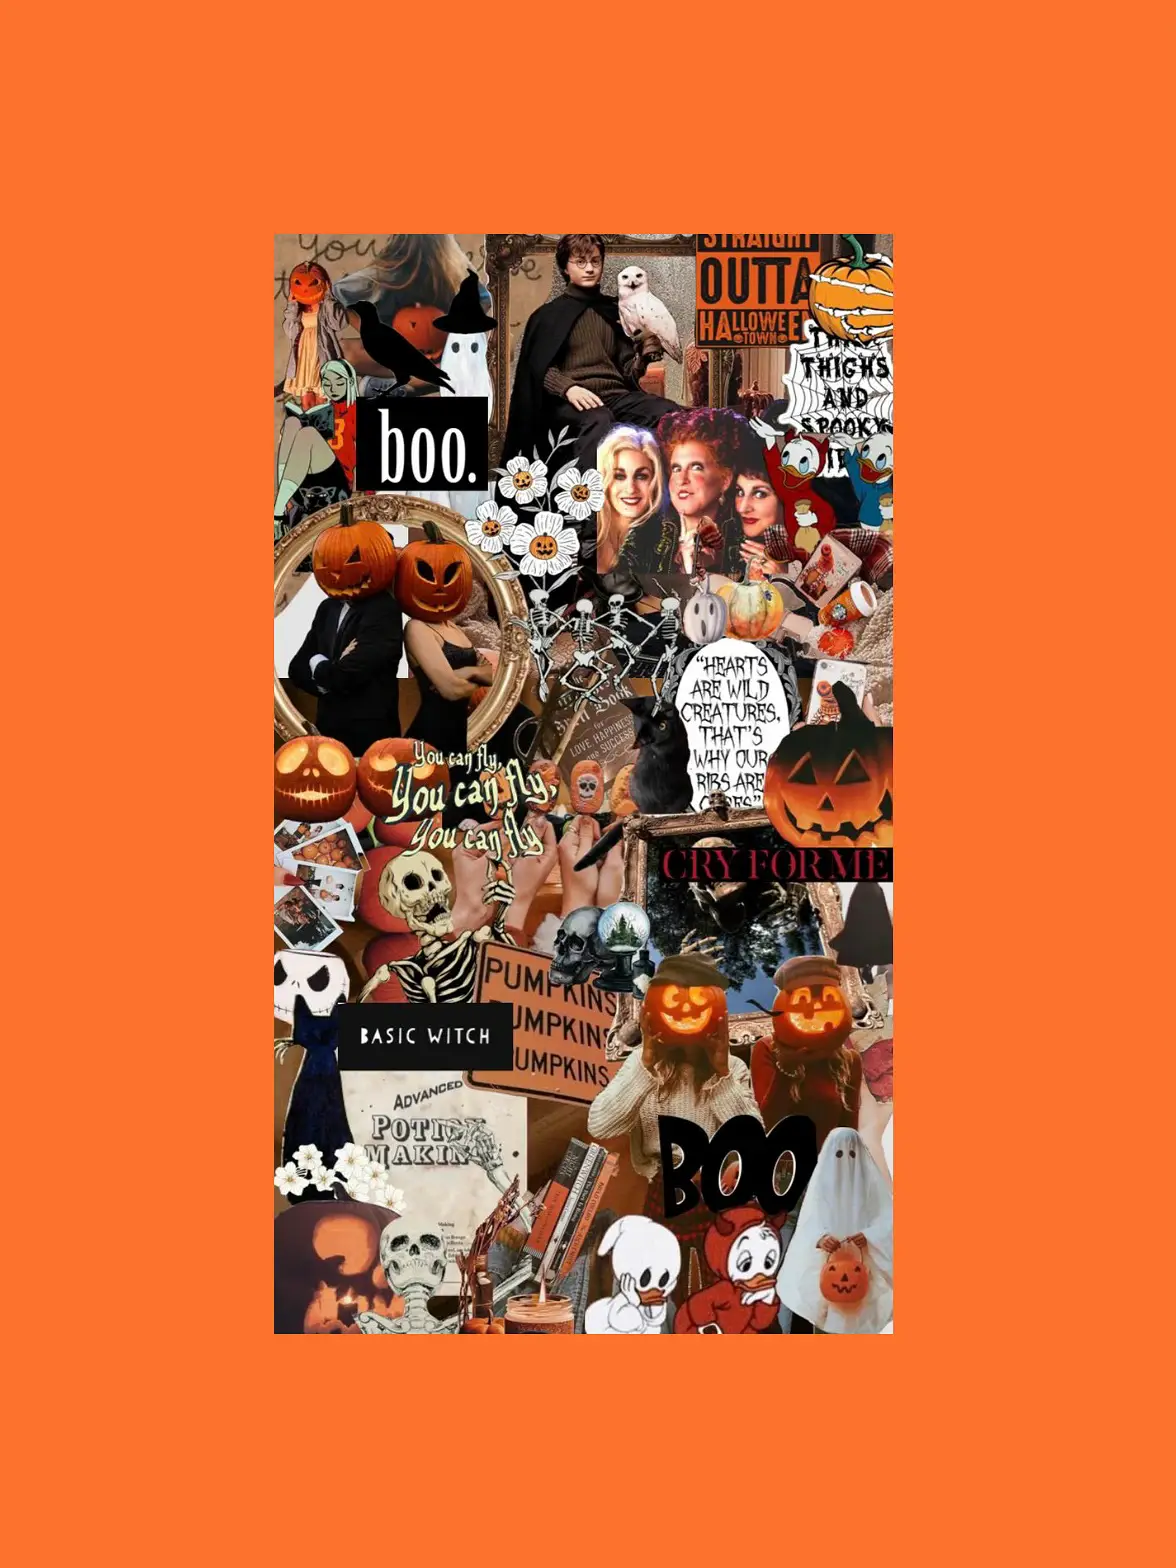 A spooky Halloween collage featuring images of pumpkins, ghosts, and witches. The background is a solid orange color. - Halloween